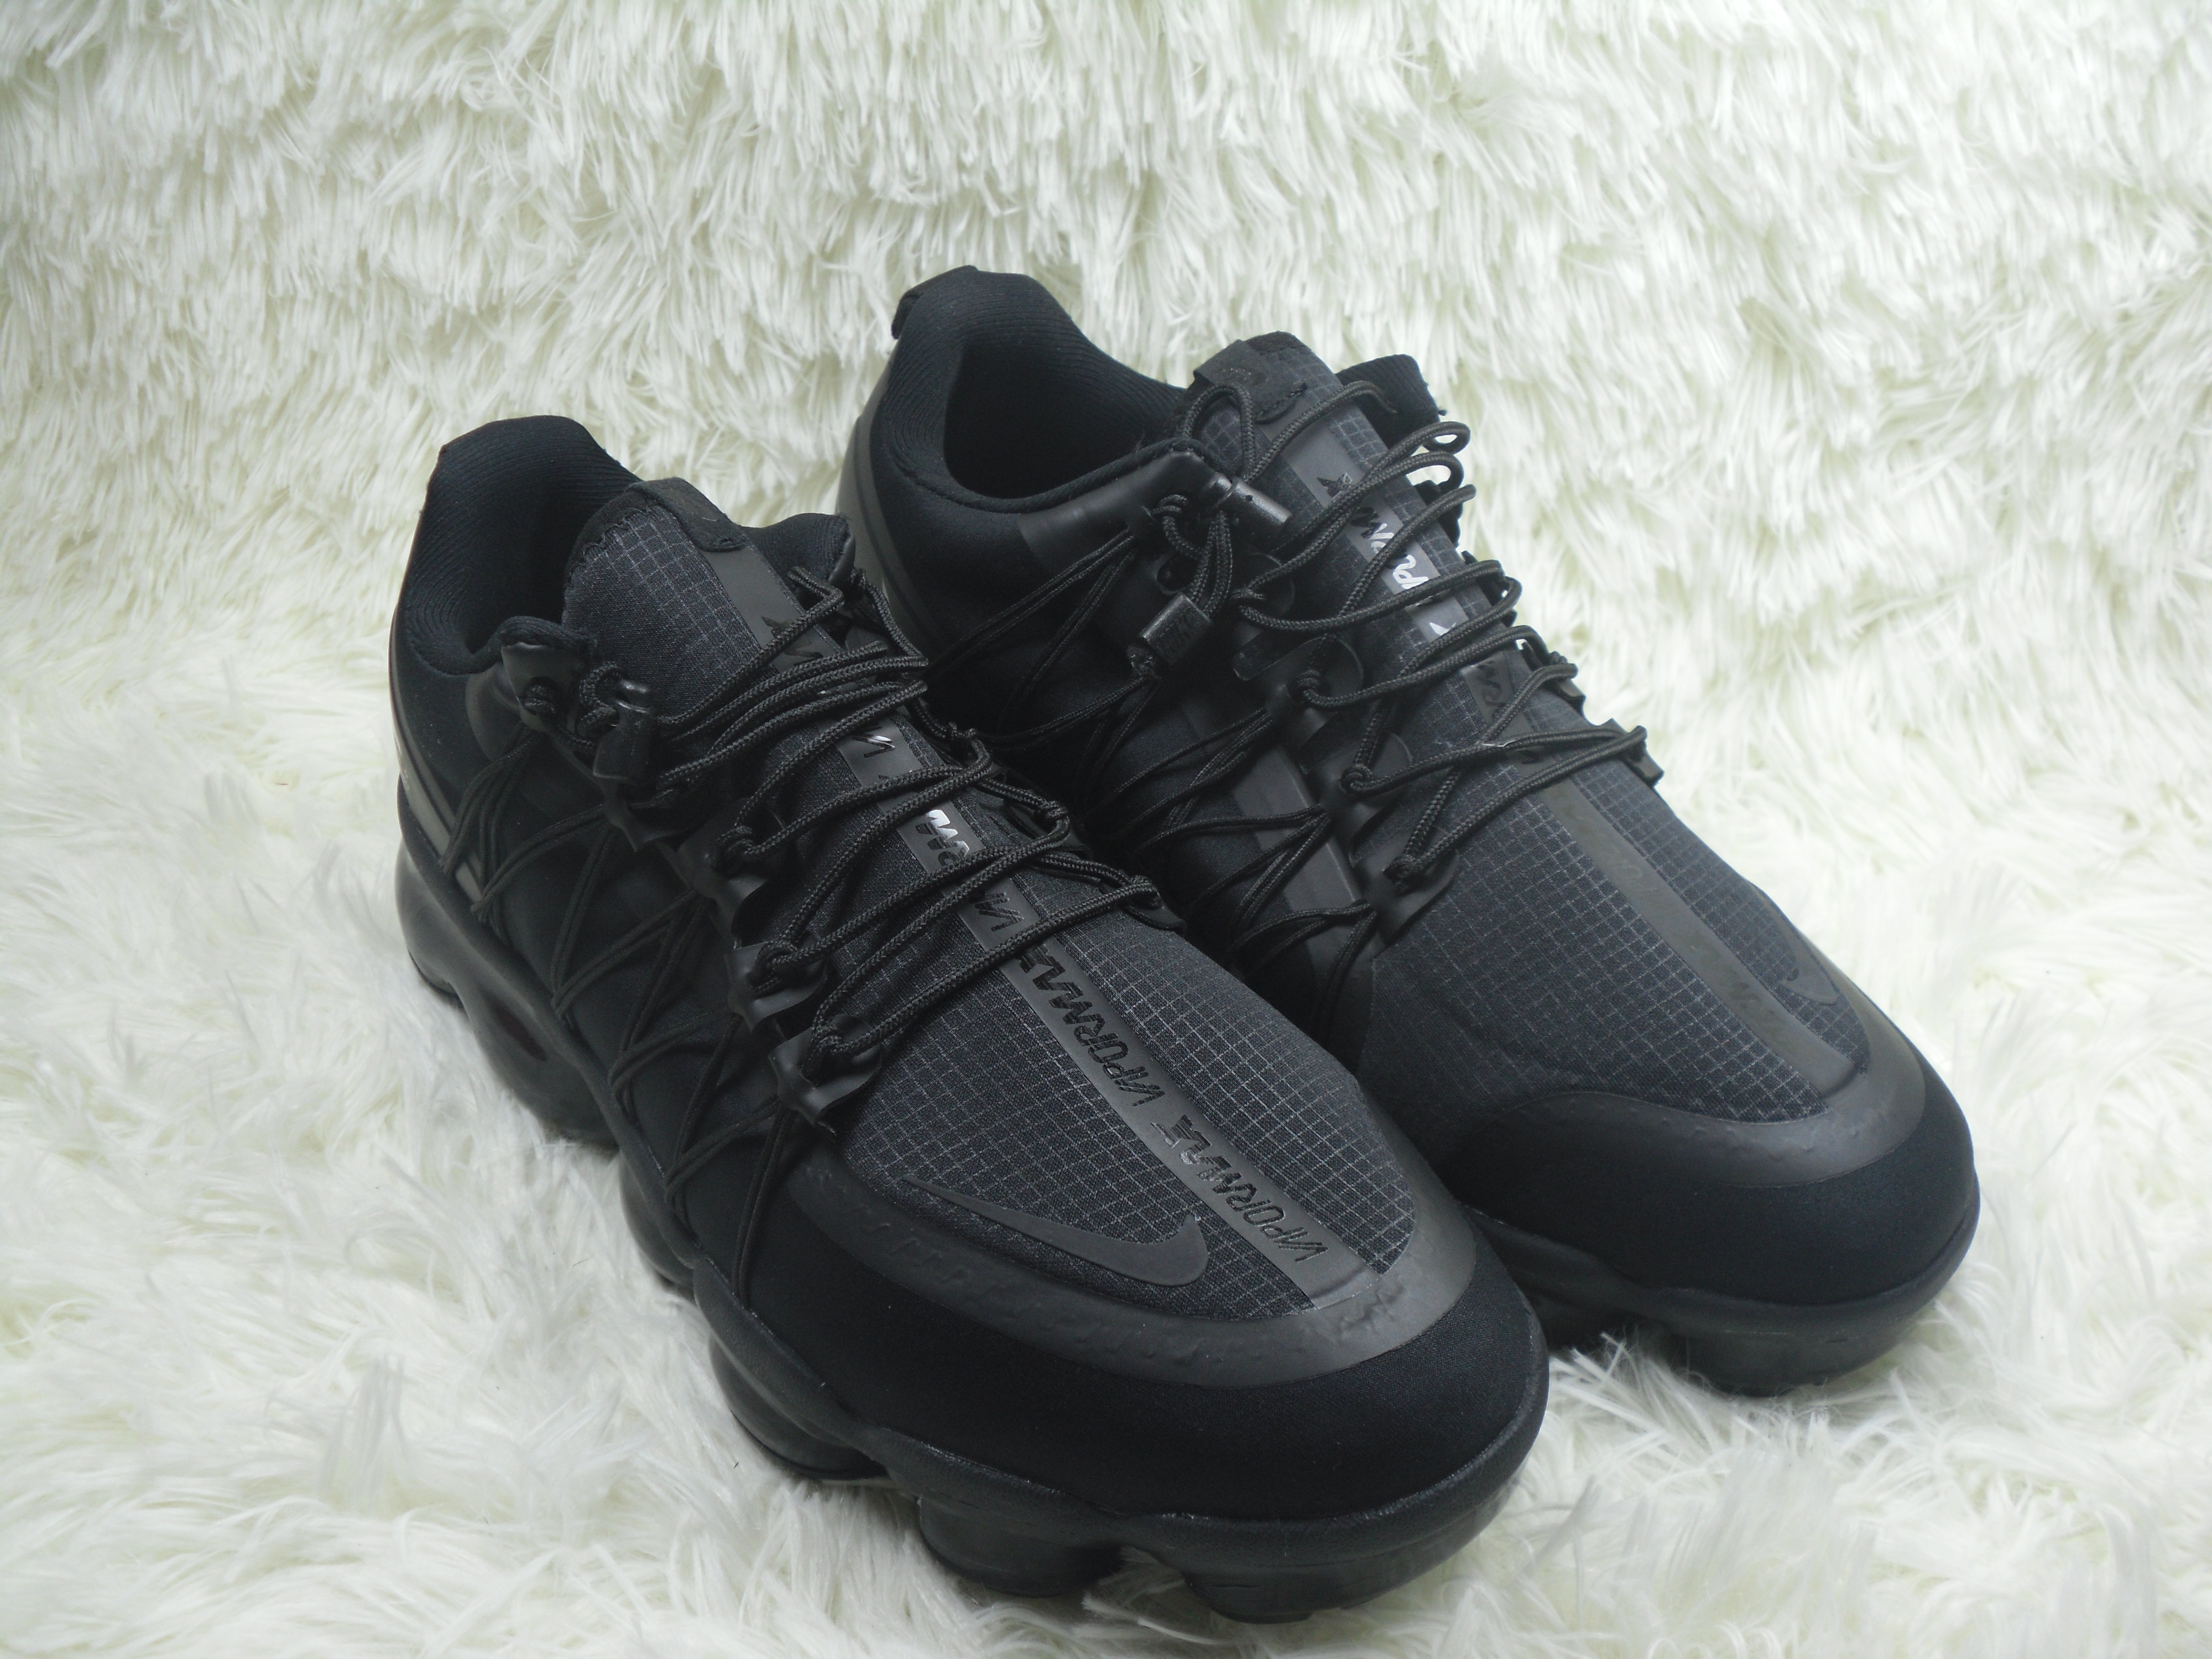 NIKE SP W Air VaporMax Run Utlty All Black Shoes - Click Image to Close